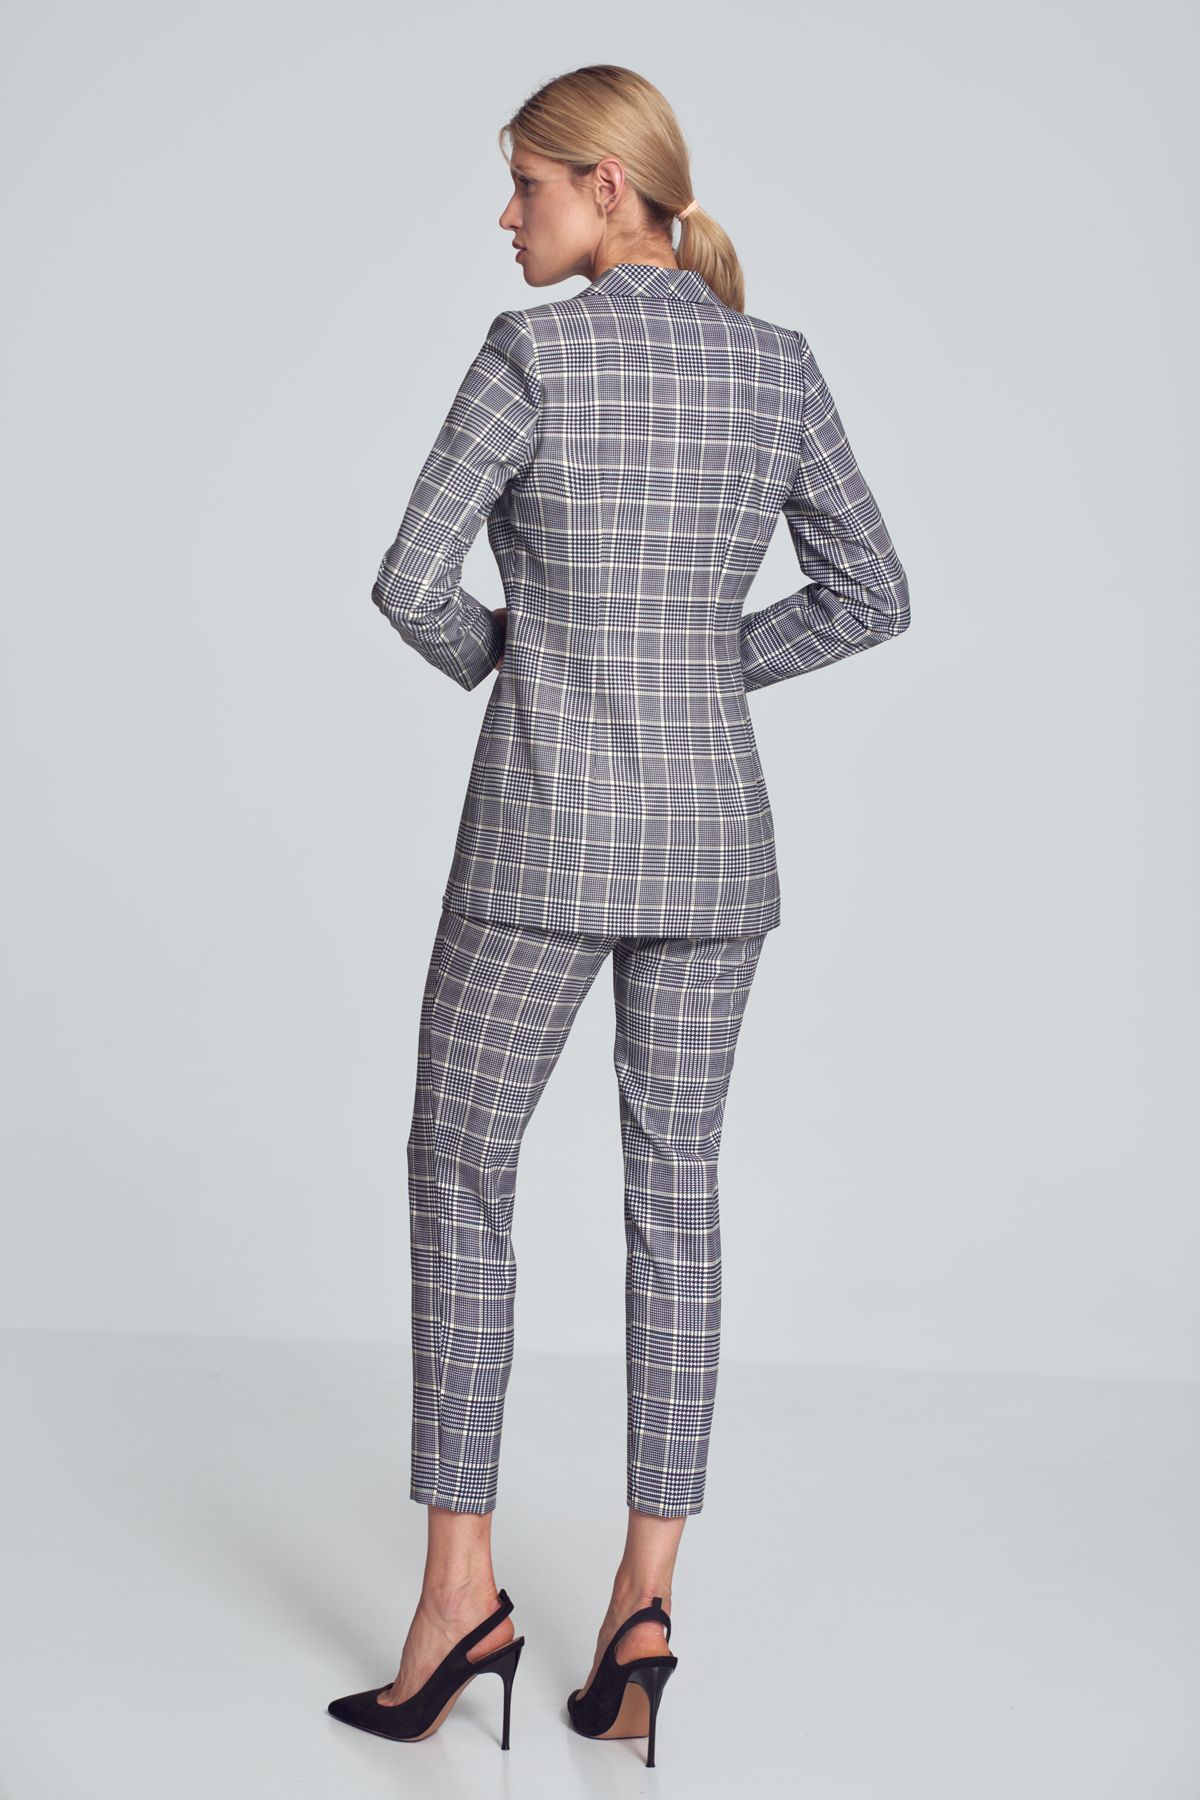 Jacket with a shawl collar in a houndstooth , slightly fitted at the waist, fastened with a single button at the front, with a lining, jacket covering the hips. No pockets.